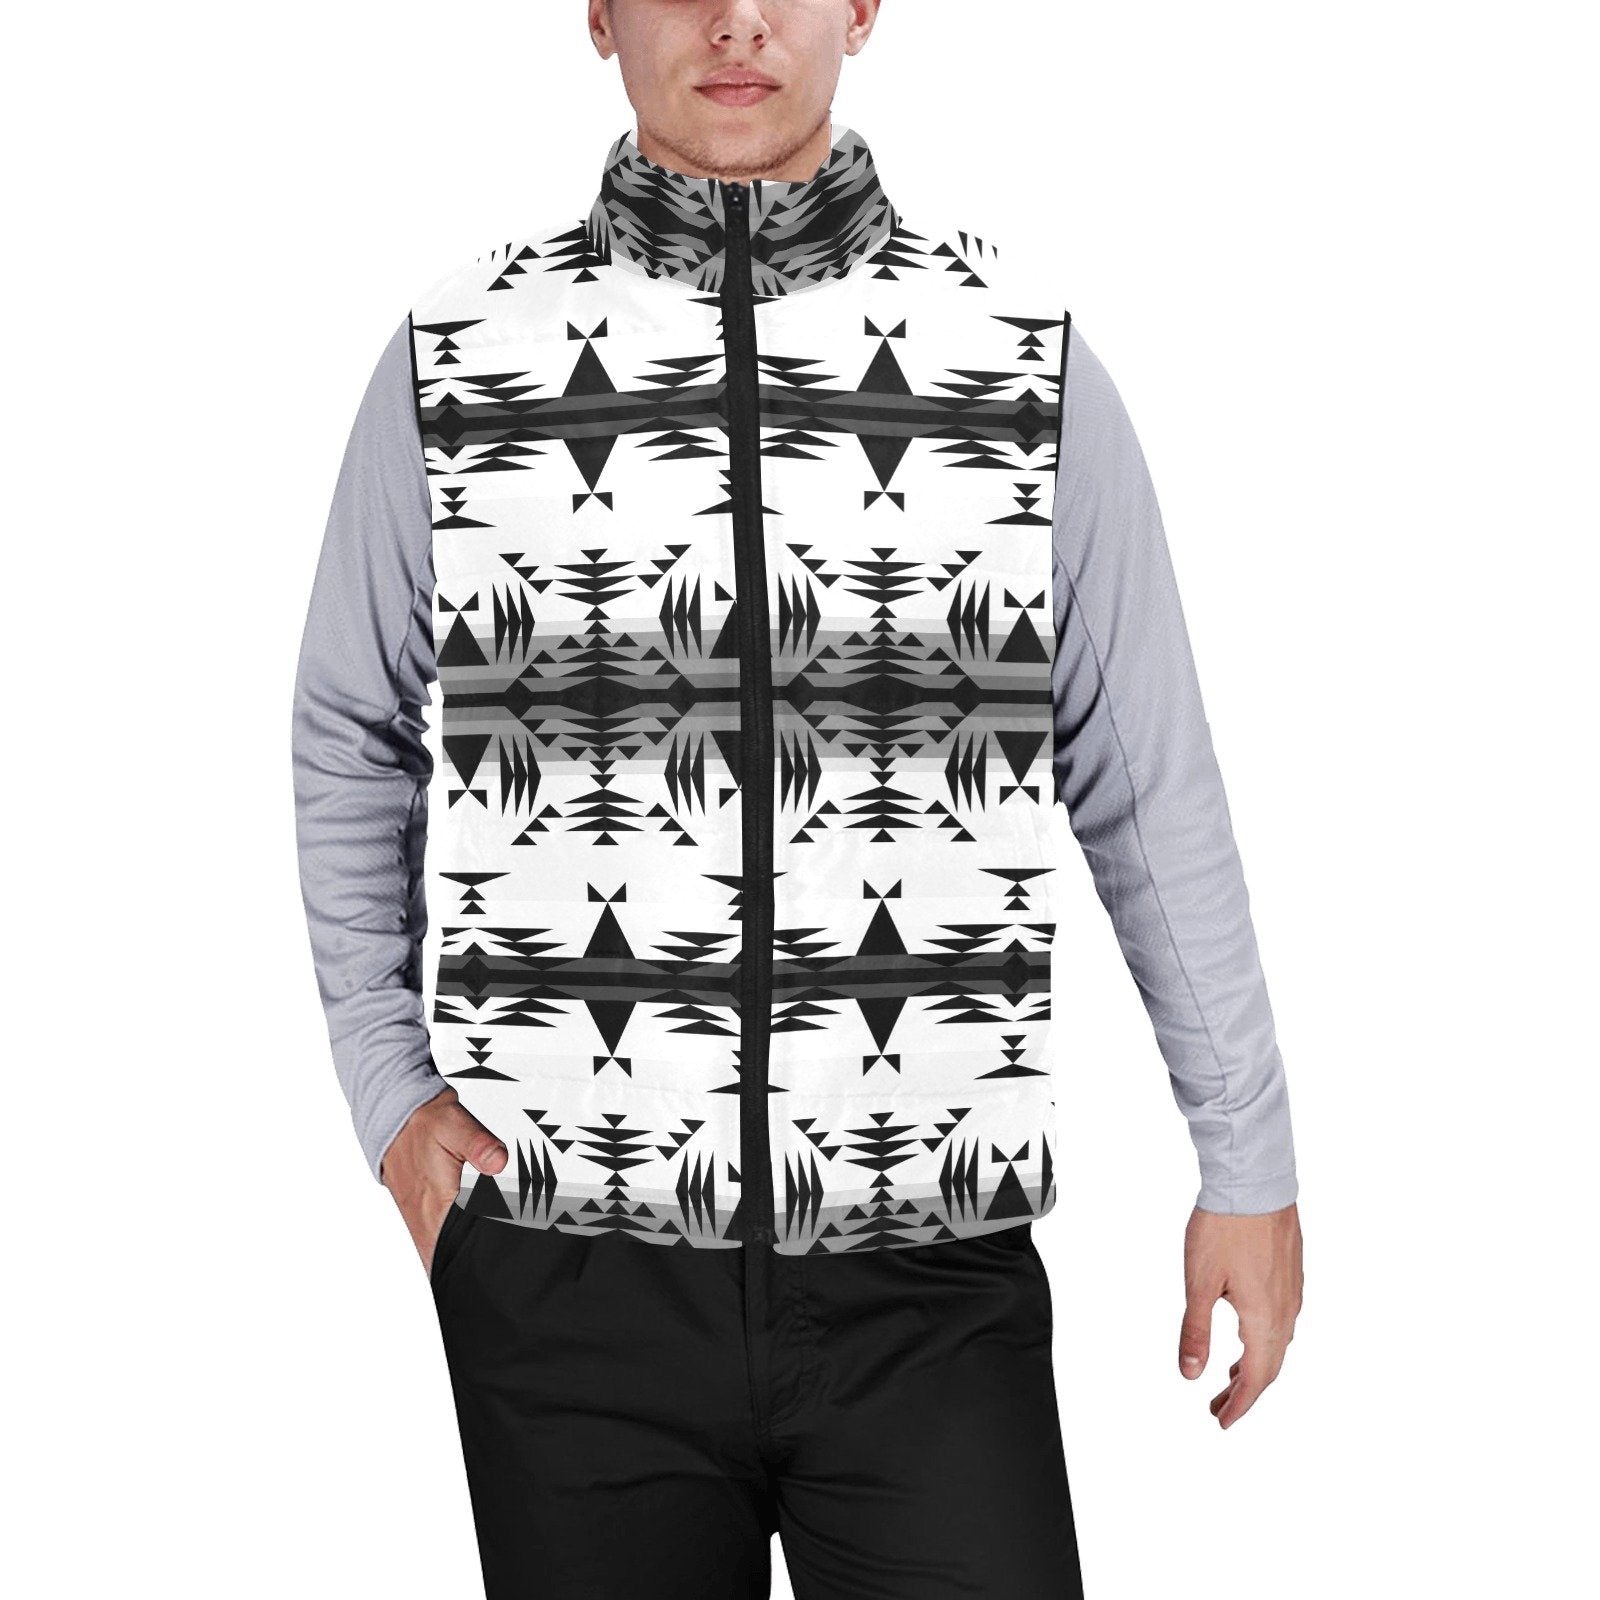 Between the Mountains White and Black Men's Padded Vest Jacket (Model H44) Men's Padded Vest Jacket (H44) e-joyer 